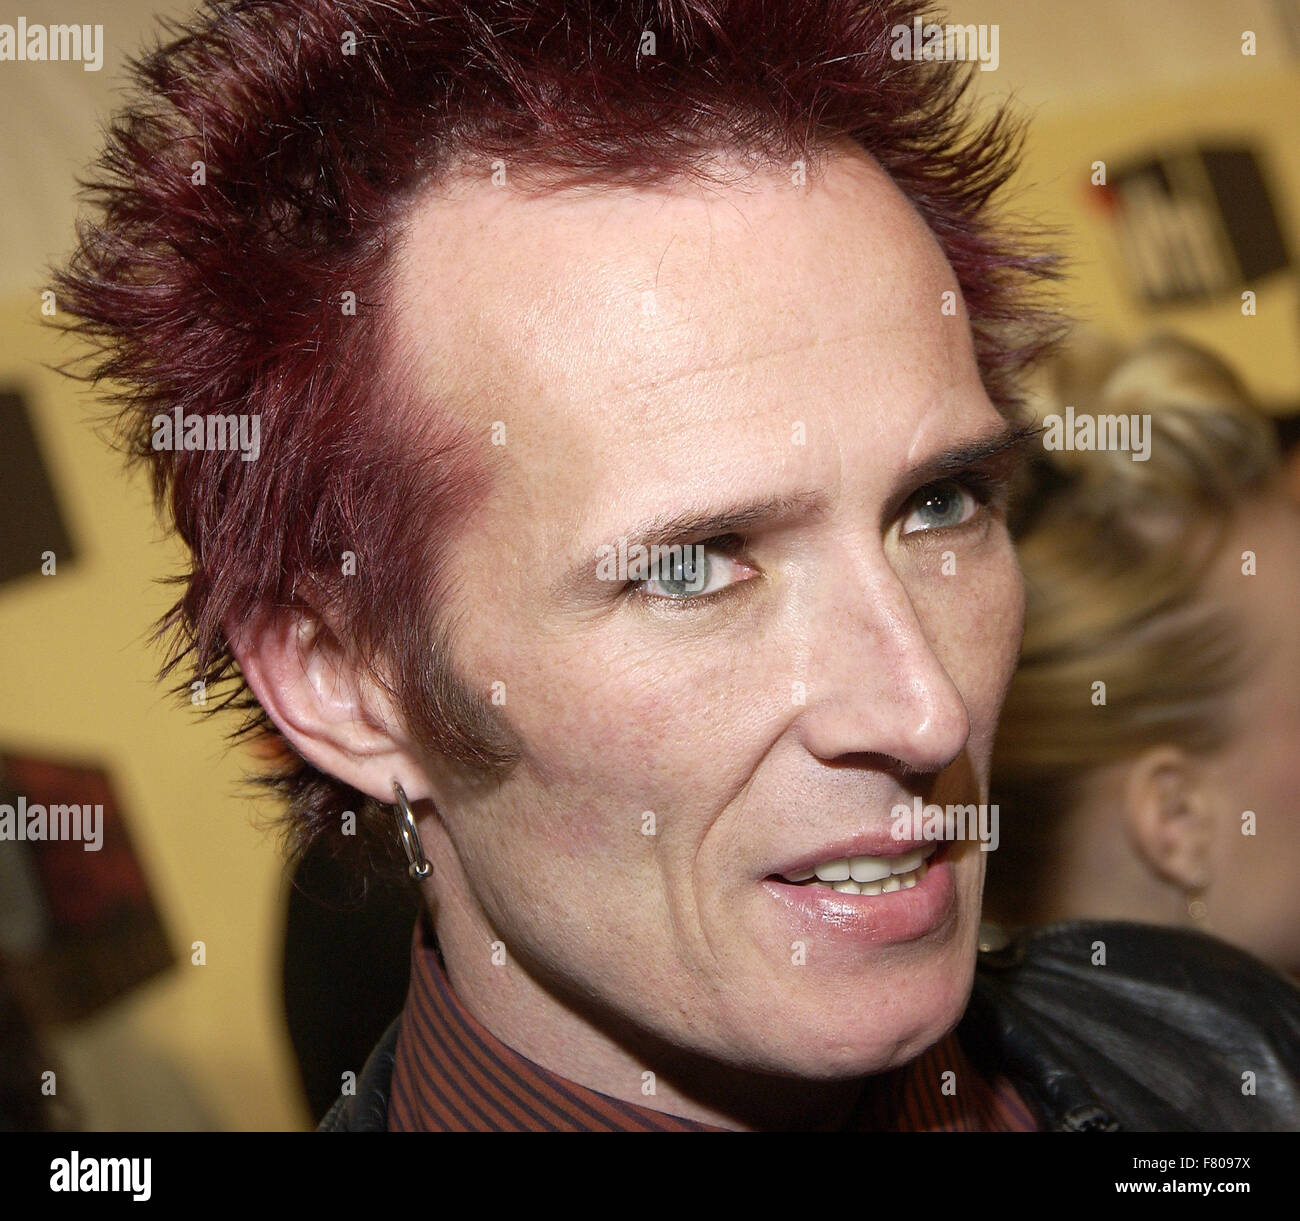 File. 3rd Dec, 2015. SCOTT WEILAND, best known as the lead singer for Stone Temple Pilots and Velvet Revolver has 'passed away in his sleep while on a tour stop in Bloomington, Minnesota.' The singer turned 48 on Oct. 27. Weiland long suffered from substance abuse issues. Pictured: Dec 01, 2004; Los Angeles, CA, USA; Singer SCOTT WEILAND of 'Velvet Revolver' at the VH1 Big In '04 awards held at the Shrine Audtiorium. © Vaughn Youtz/ZUMAPRESS. Credit:  ZUMA Press, Inc./Alamy Live News Stock Photo